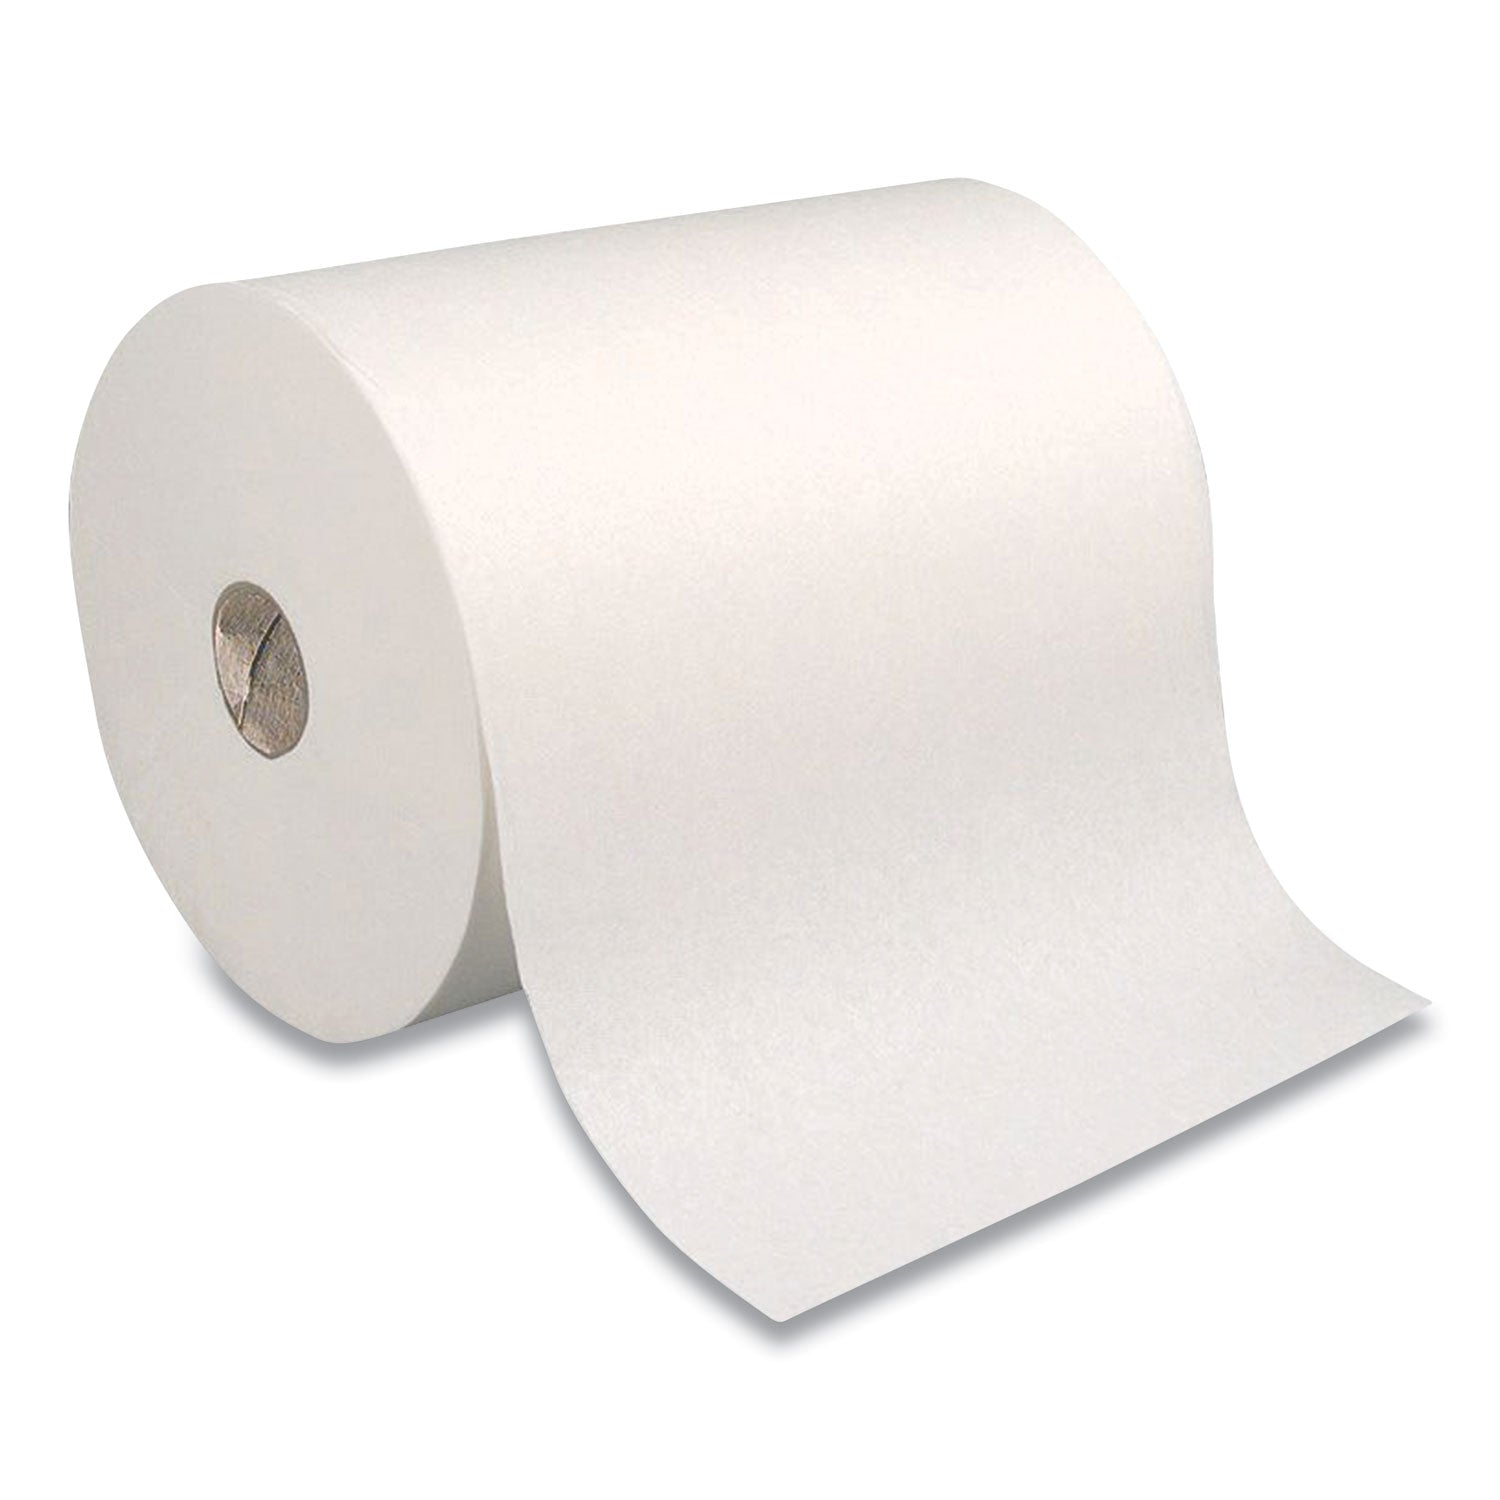 recycled-hardwound-paper-towels-1-ply-787-x-800-ft-white-6-rolls-carton_cwz887841 - 1